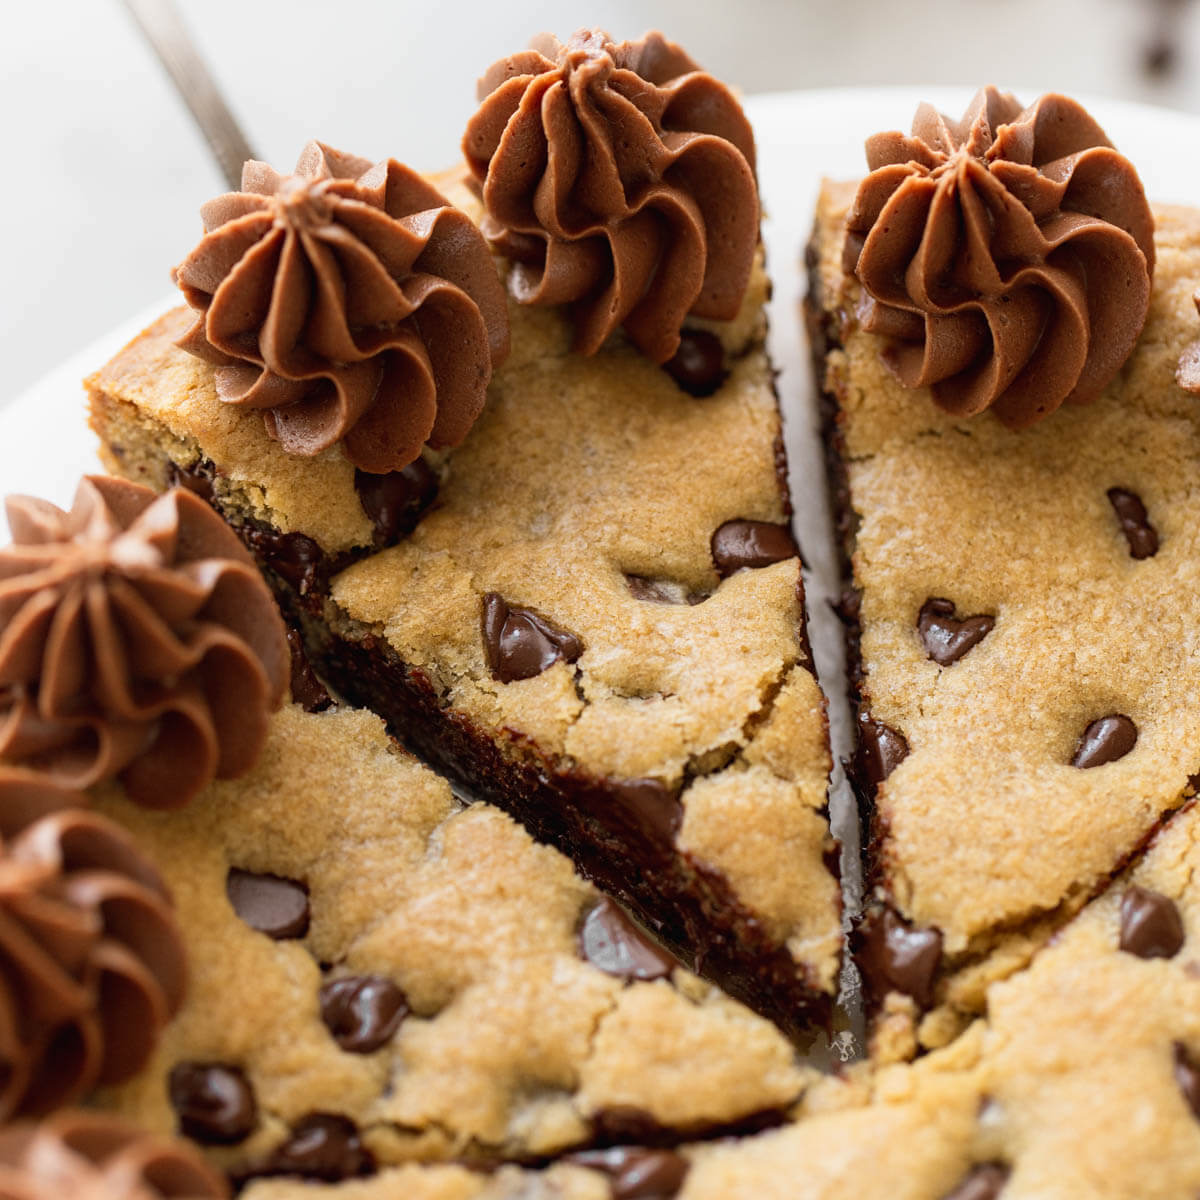 Best Double Cookie Cake Recipe - How to Make Double Cookie Cake